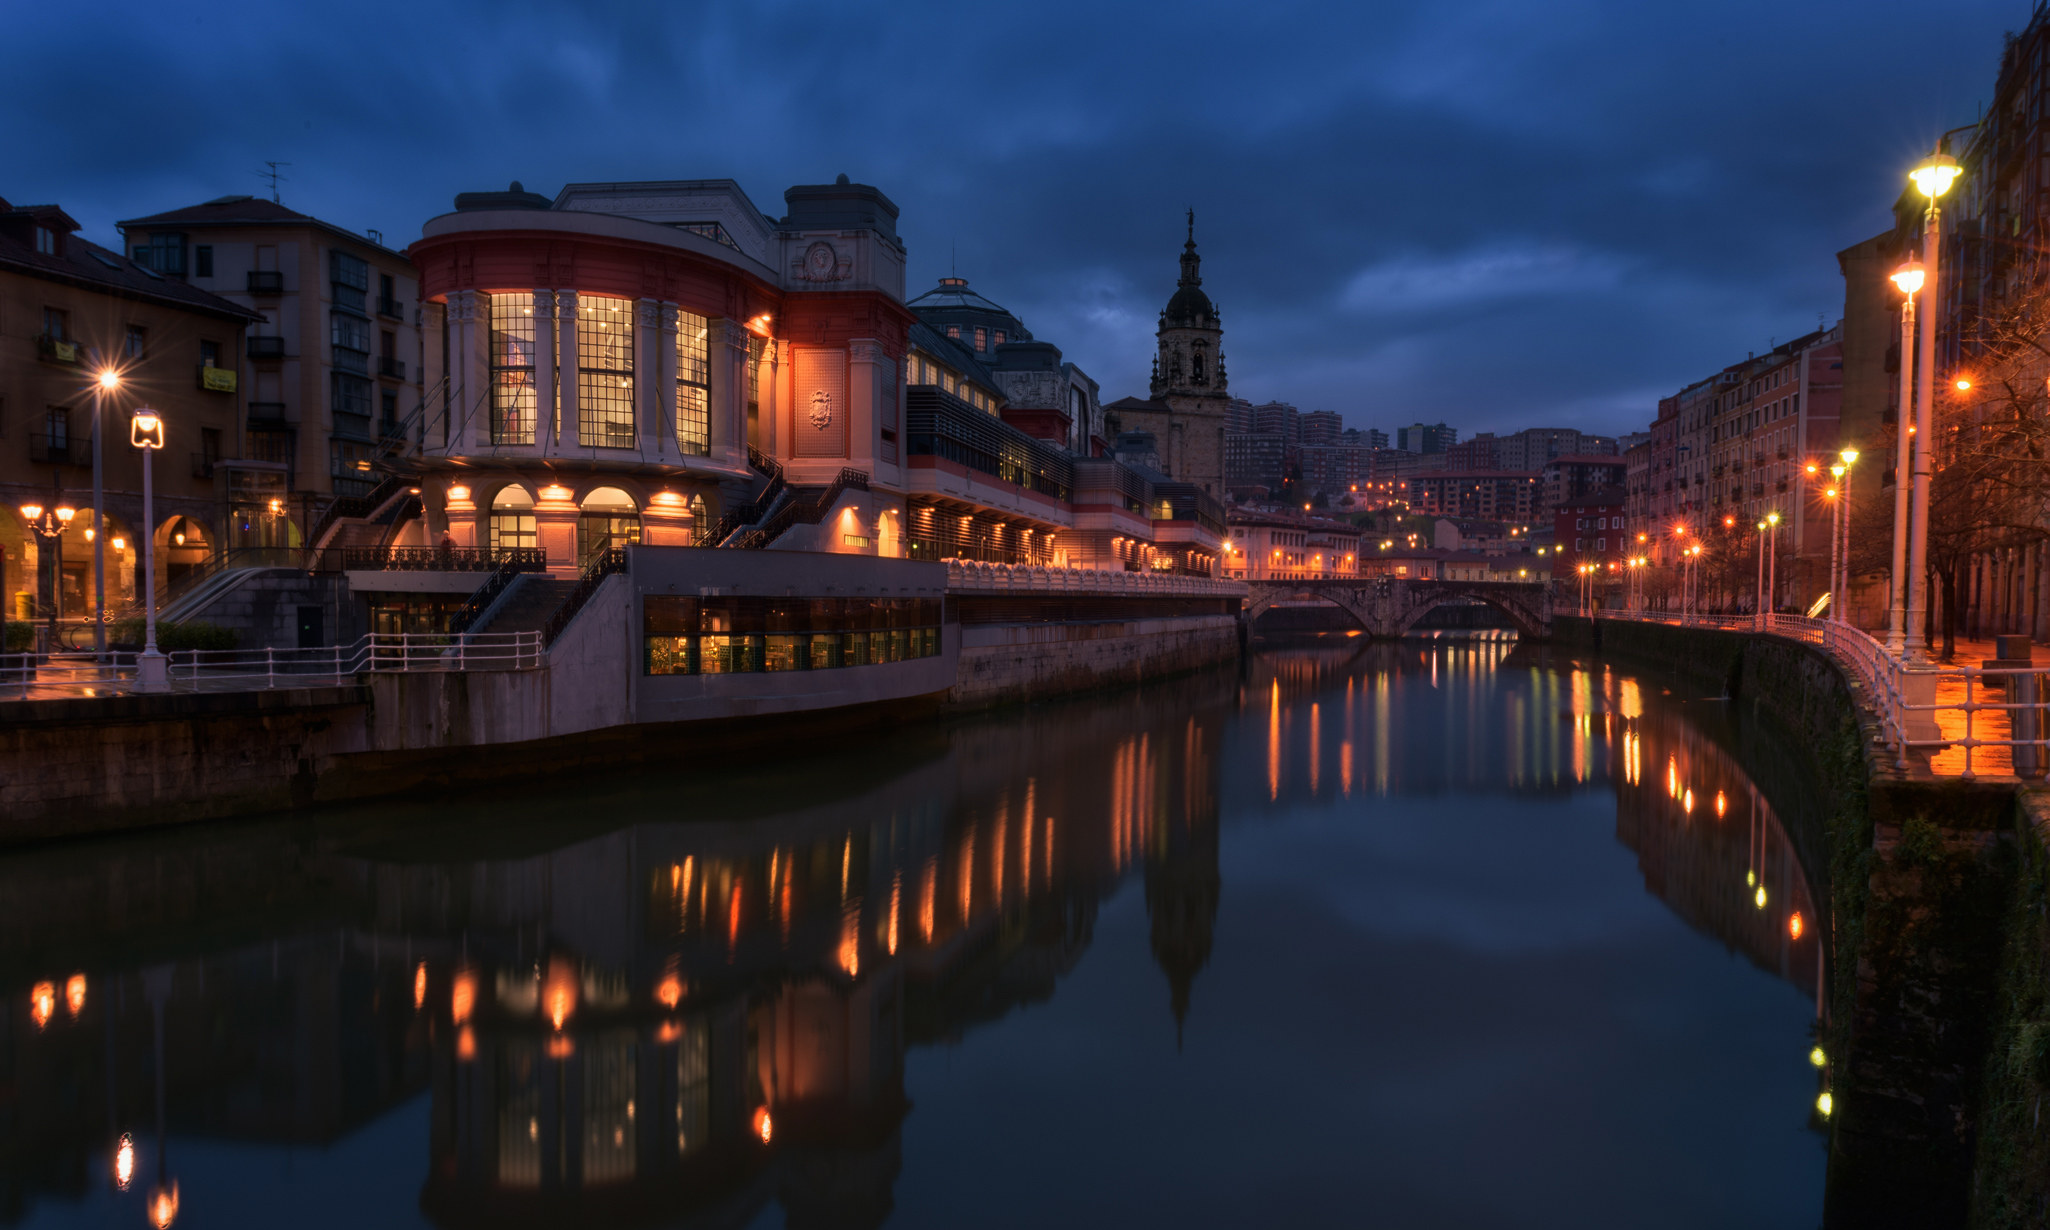 Architecture Bilbao Canal City House Night Reflection Spain 2050x1230